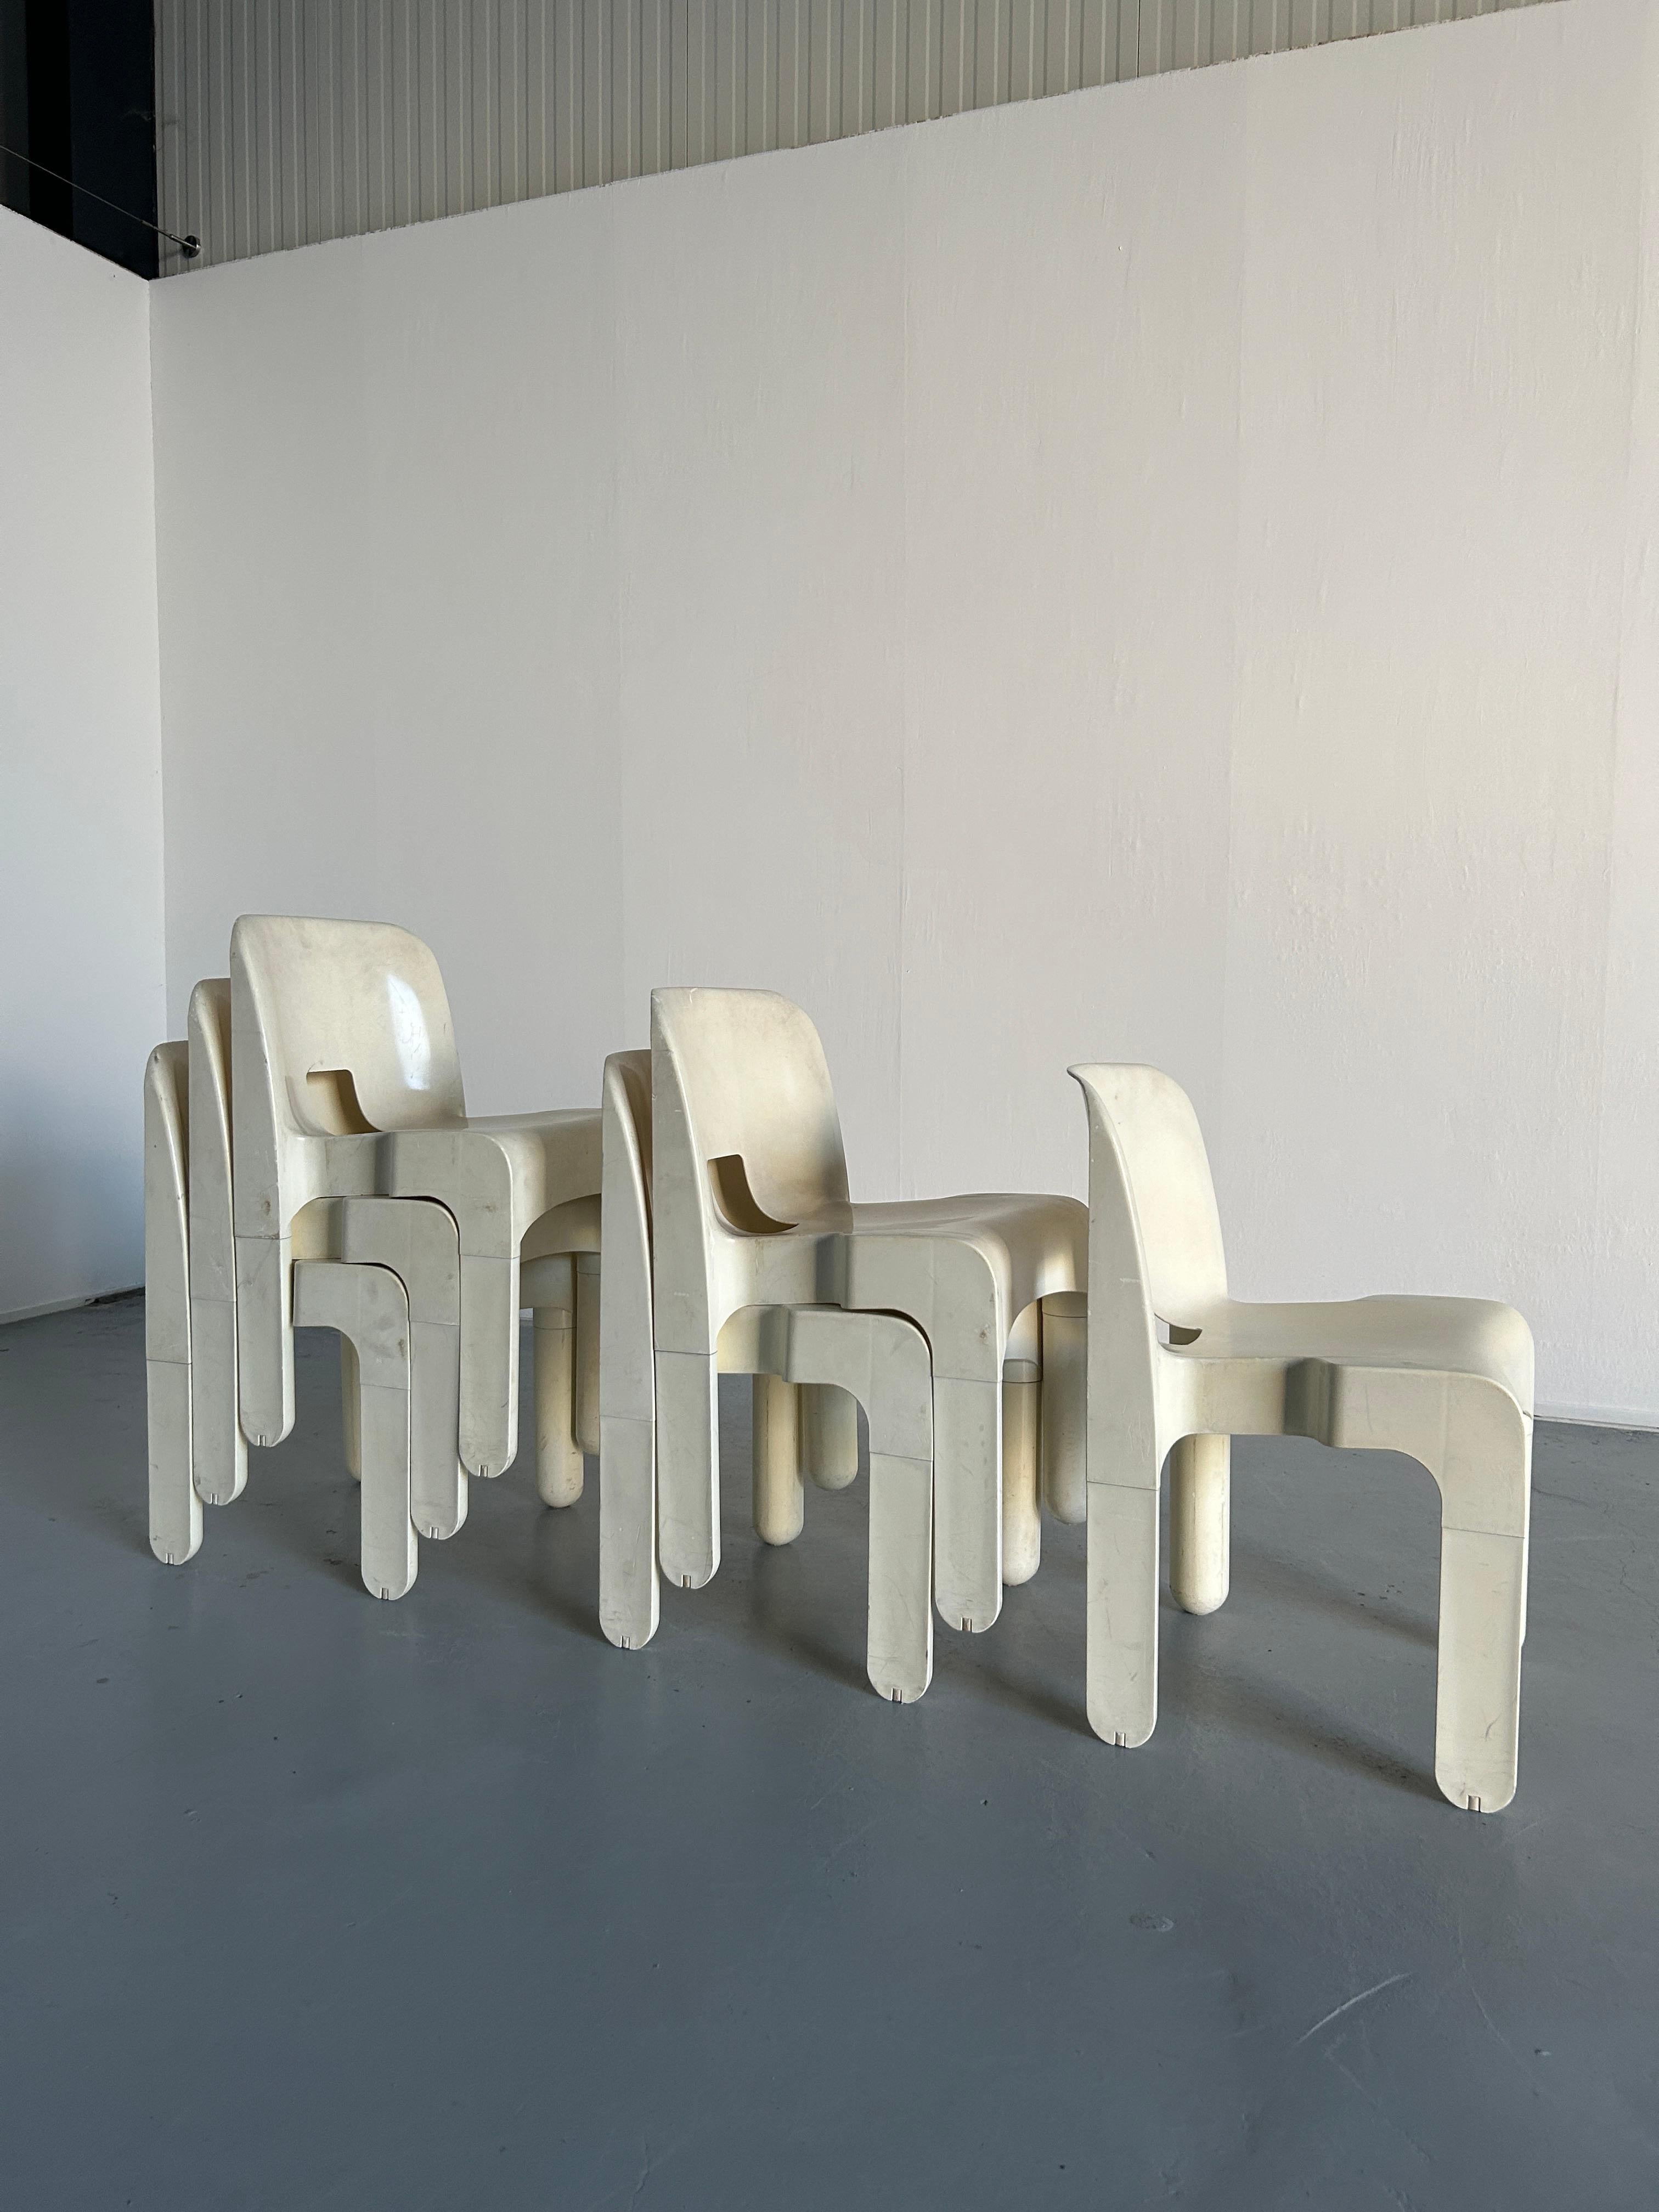 1 of 6 Joe Colombo Model '4867' or 'Universale' White Edition Chairs for Kartell 1